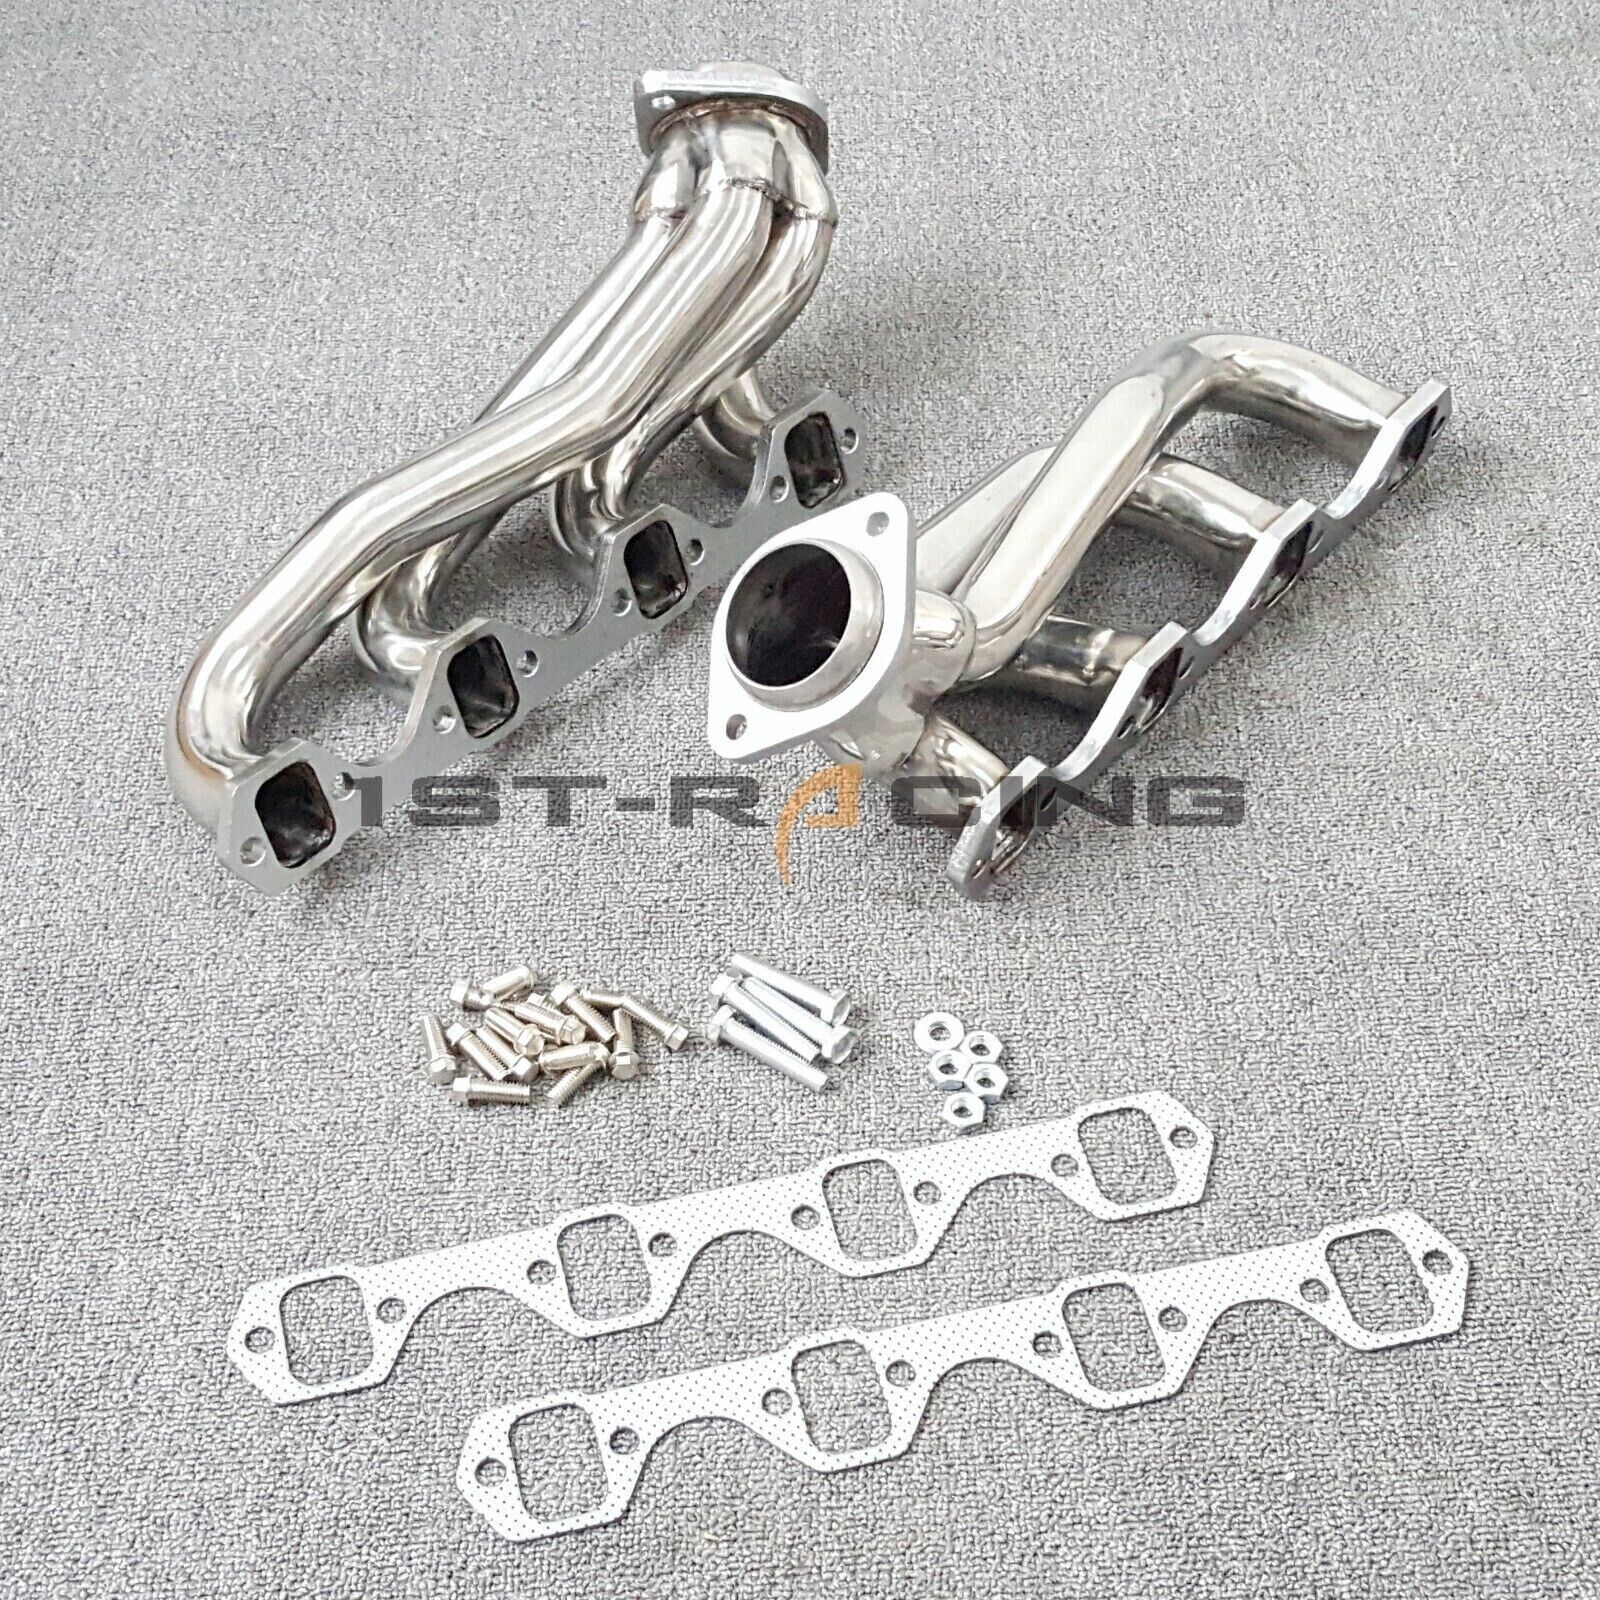 Stainless Exhaust Headers for 1986-1993 Ford Mustang GT/LX Fox Body 5.0L 302Cu